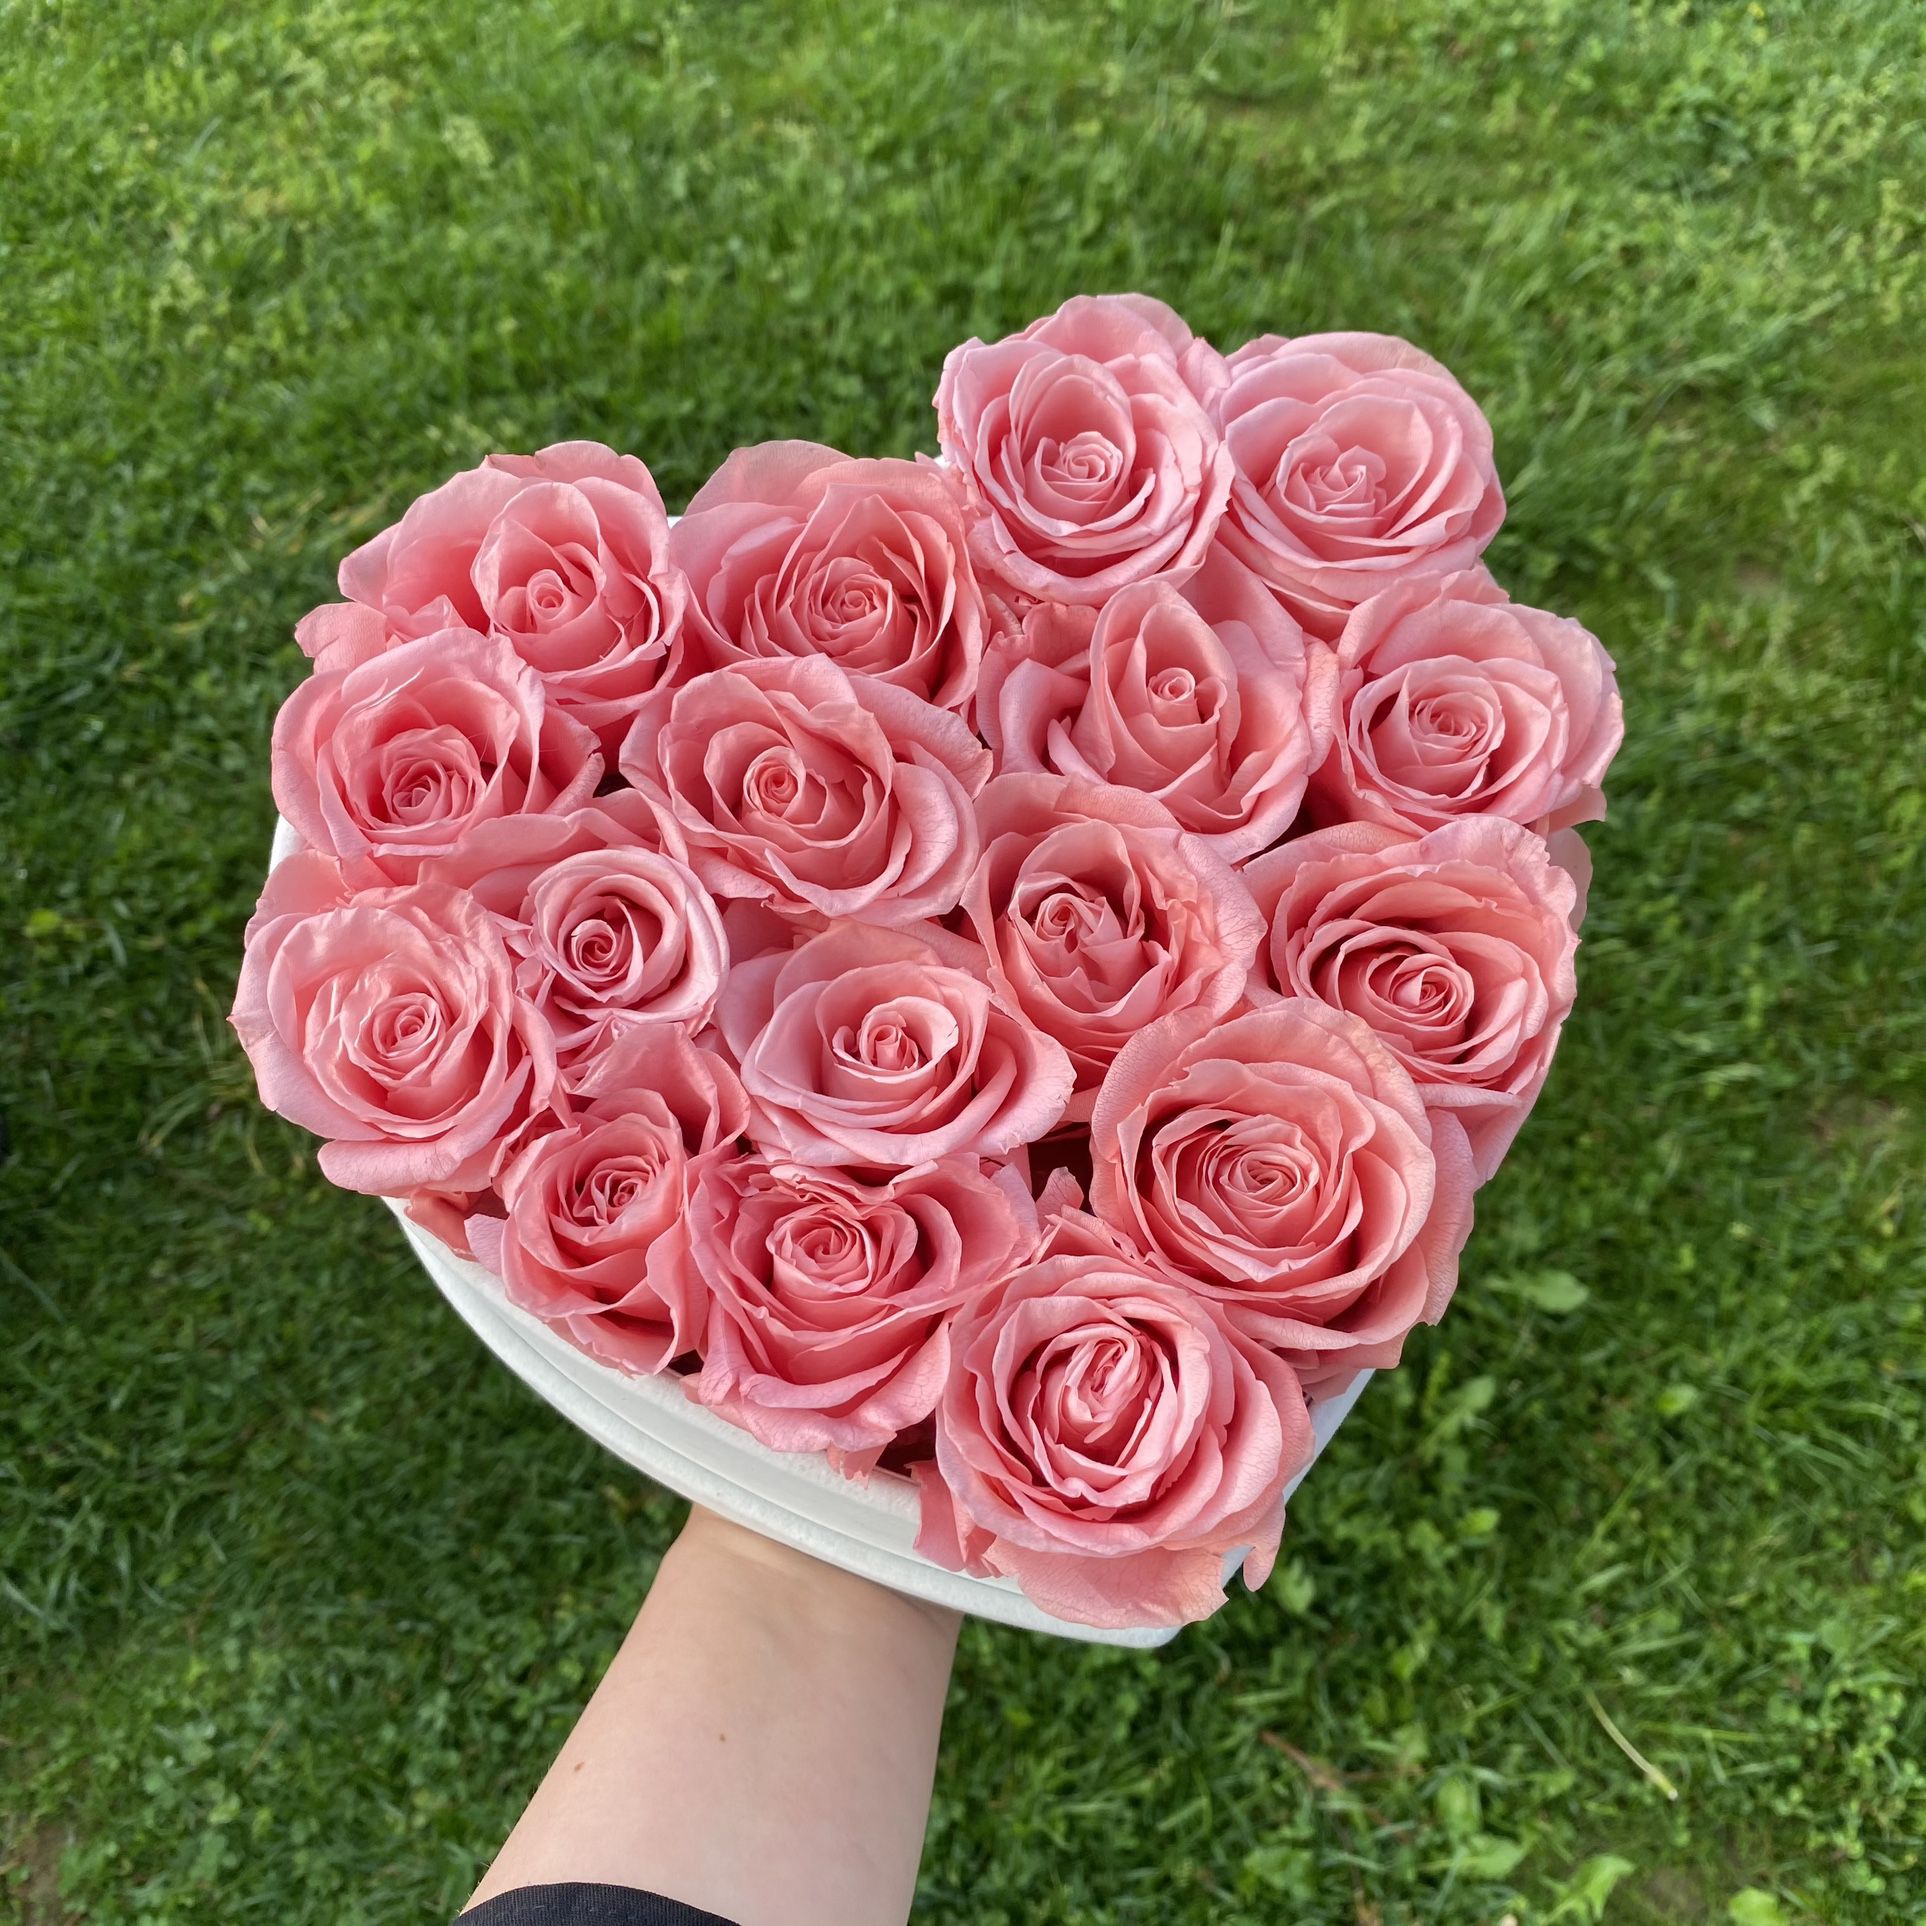 Baby Pink Velvet Heart Shape Eternal Box Roses birthday prom Gift Real Preserved baby pink Flowers Long Lasting present Bday anniversary immortal